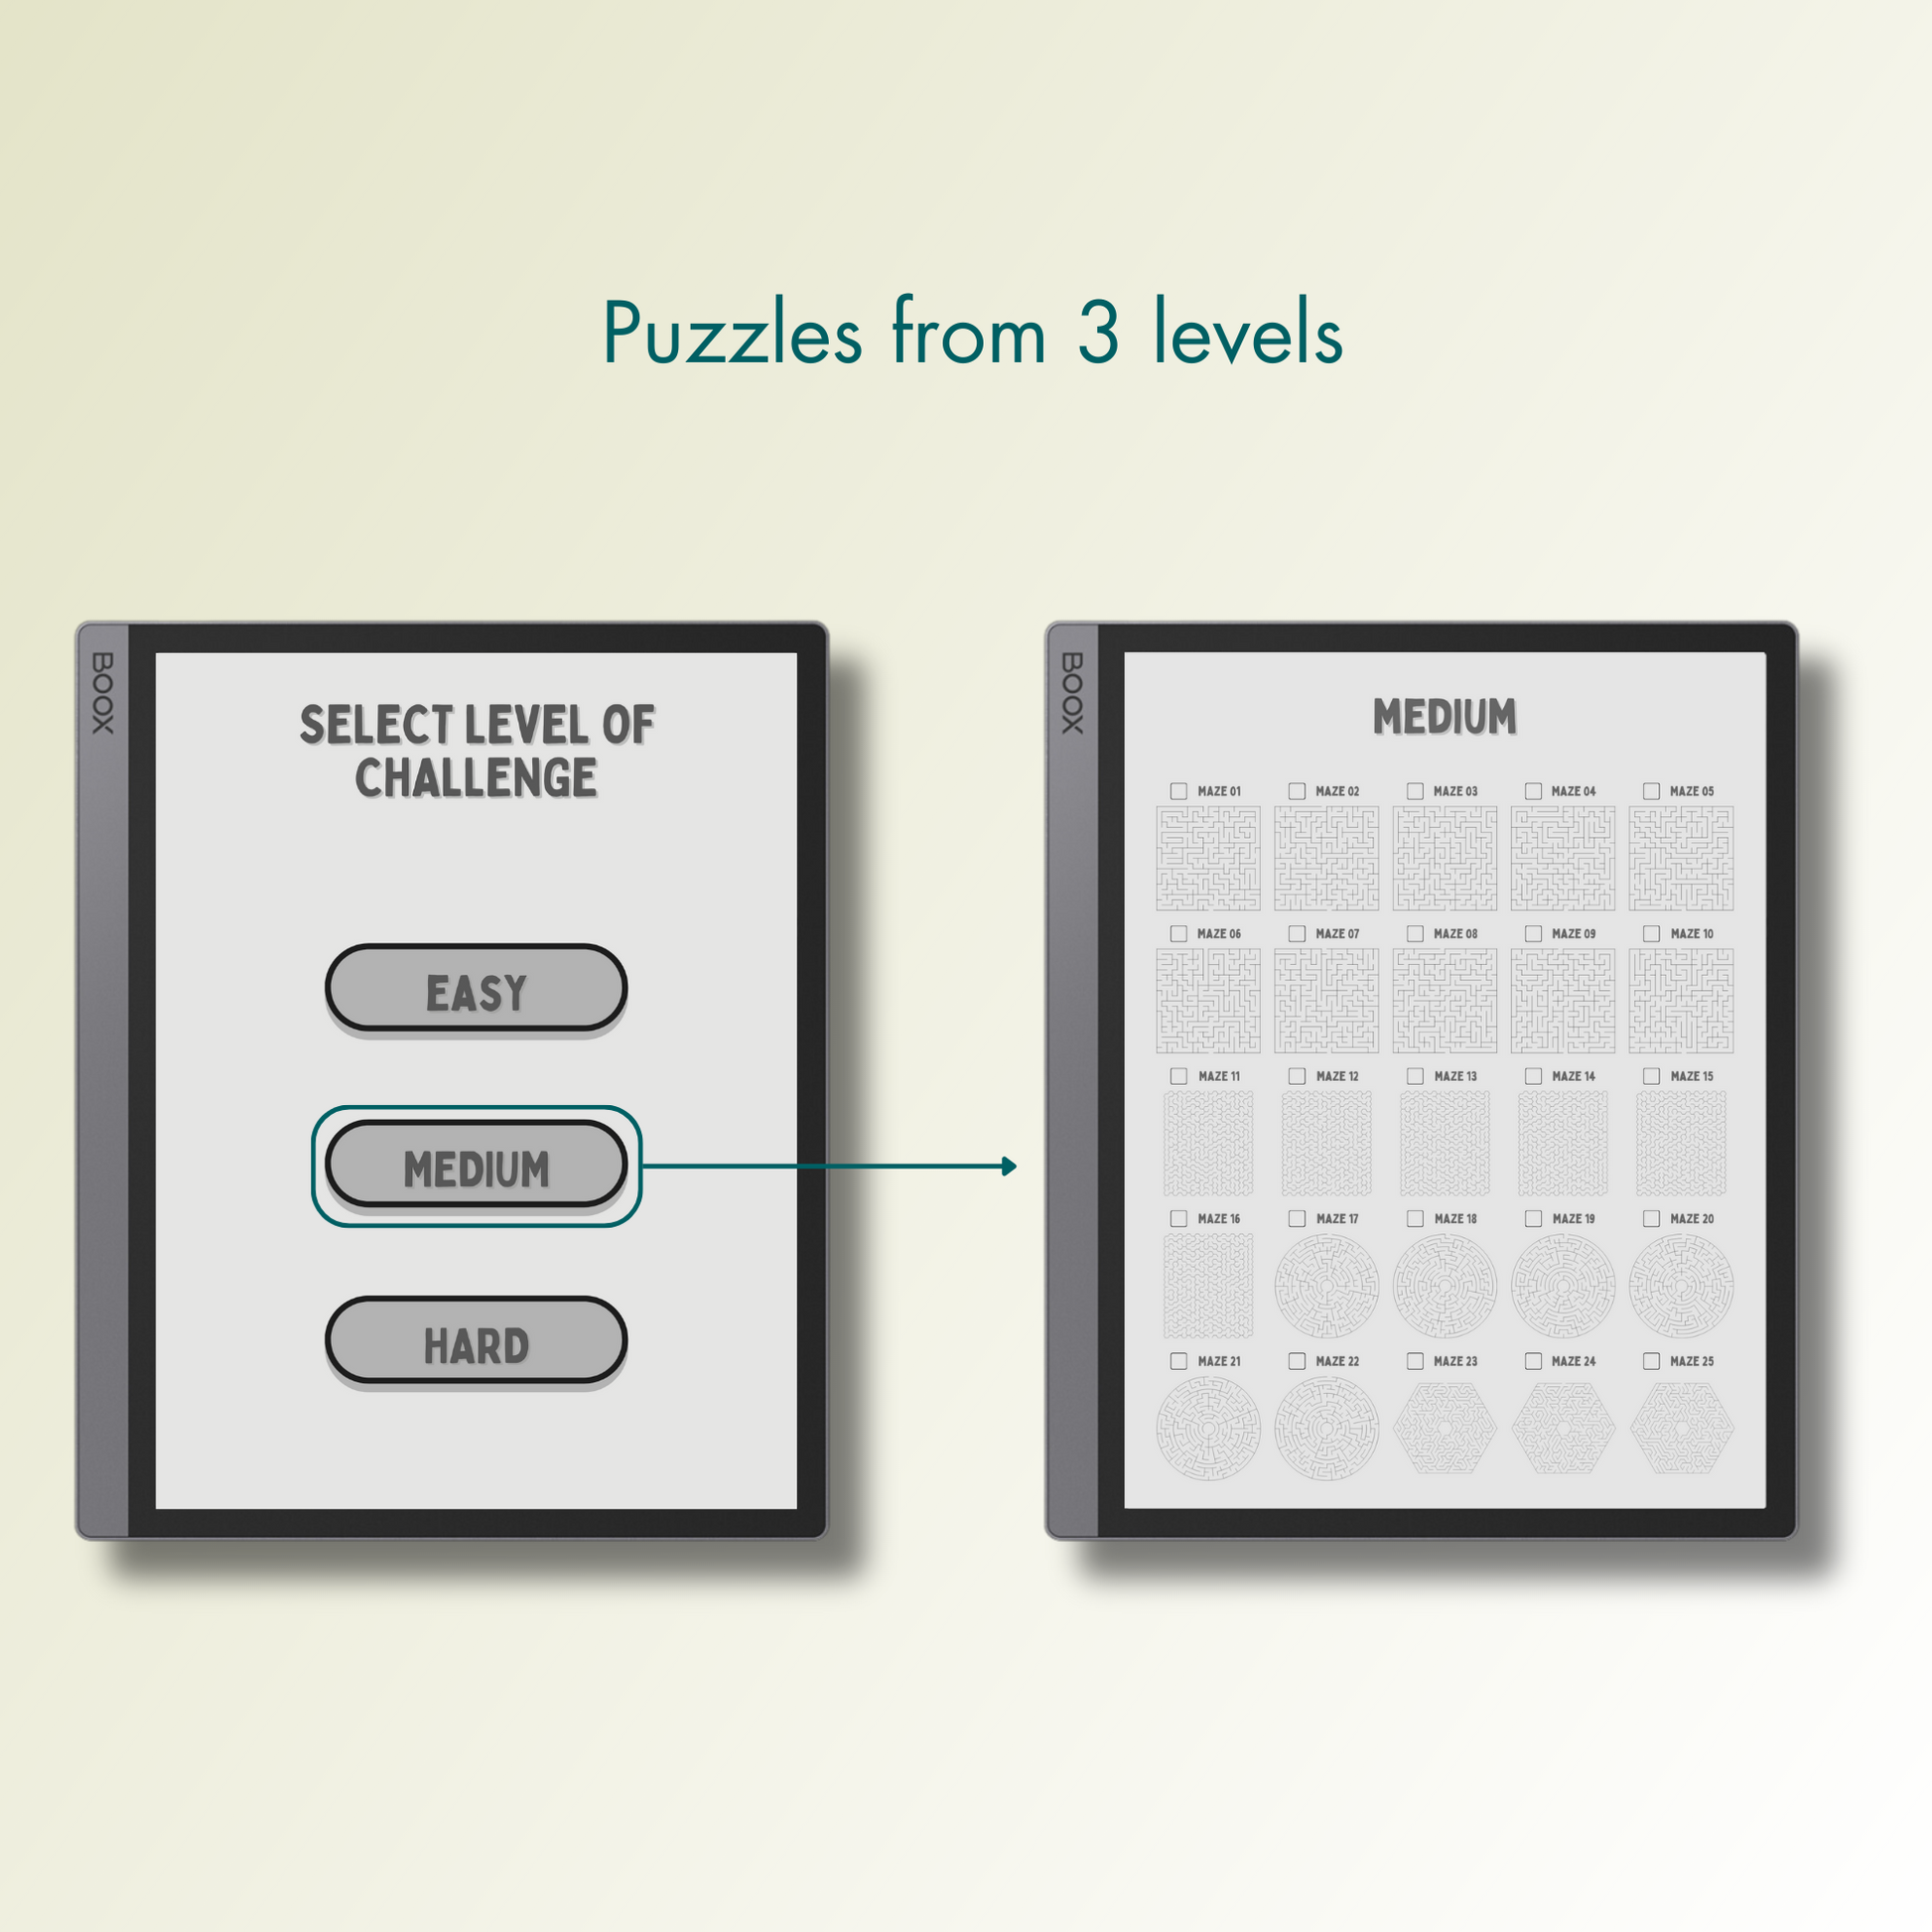 Onyx Boox Maze Puzzles in 3 different levels.